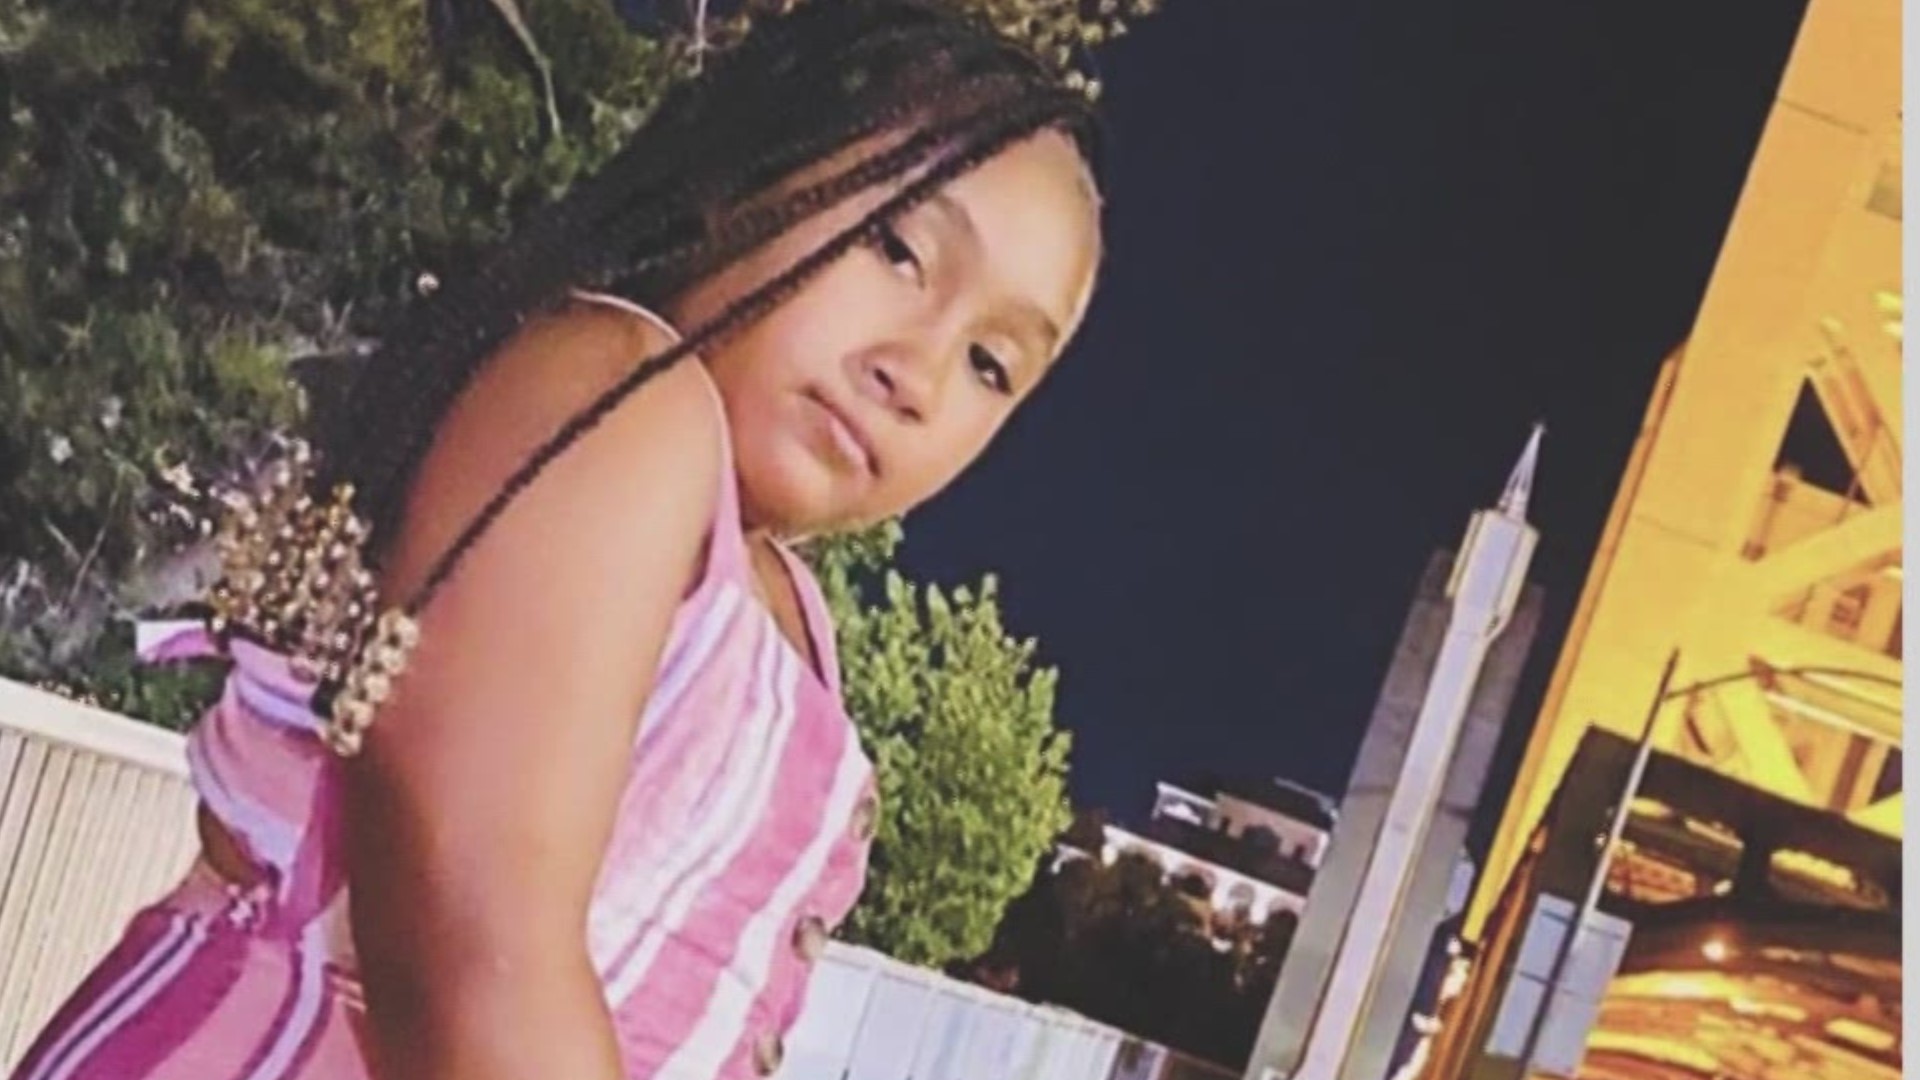 California mall shooting, 9-year-old hit